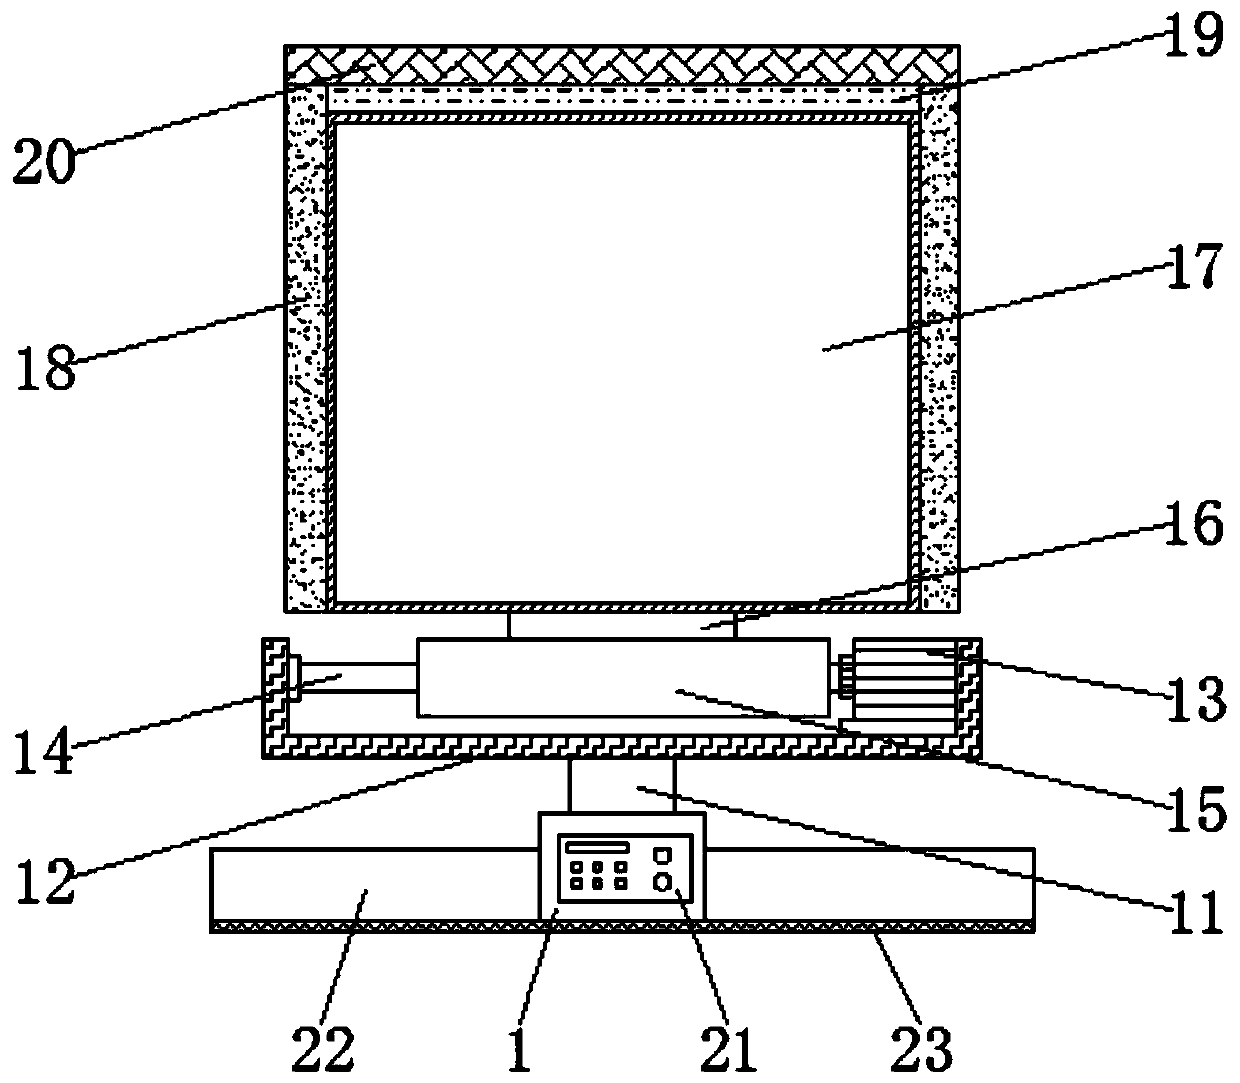 Computer display with automatically-adjusted height and pitching angle